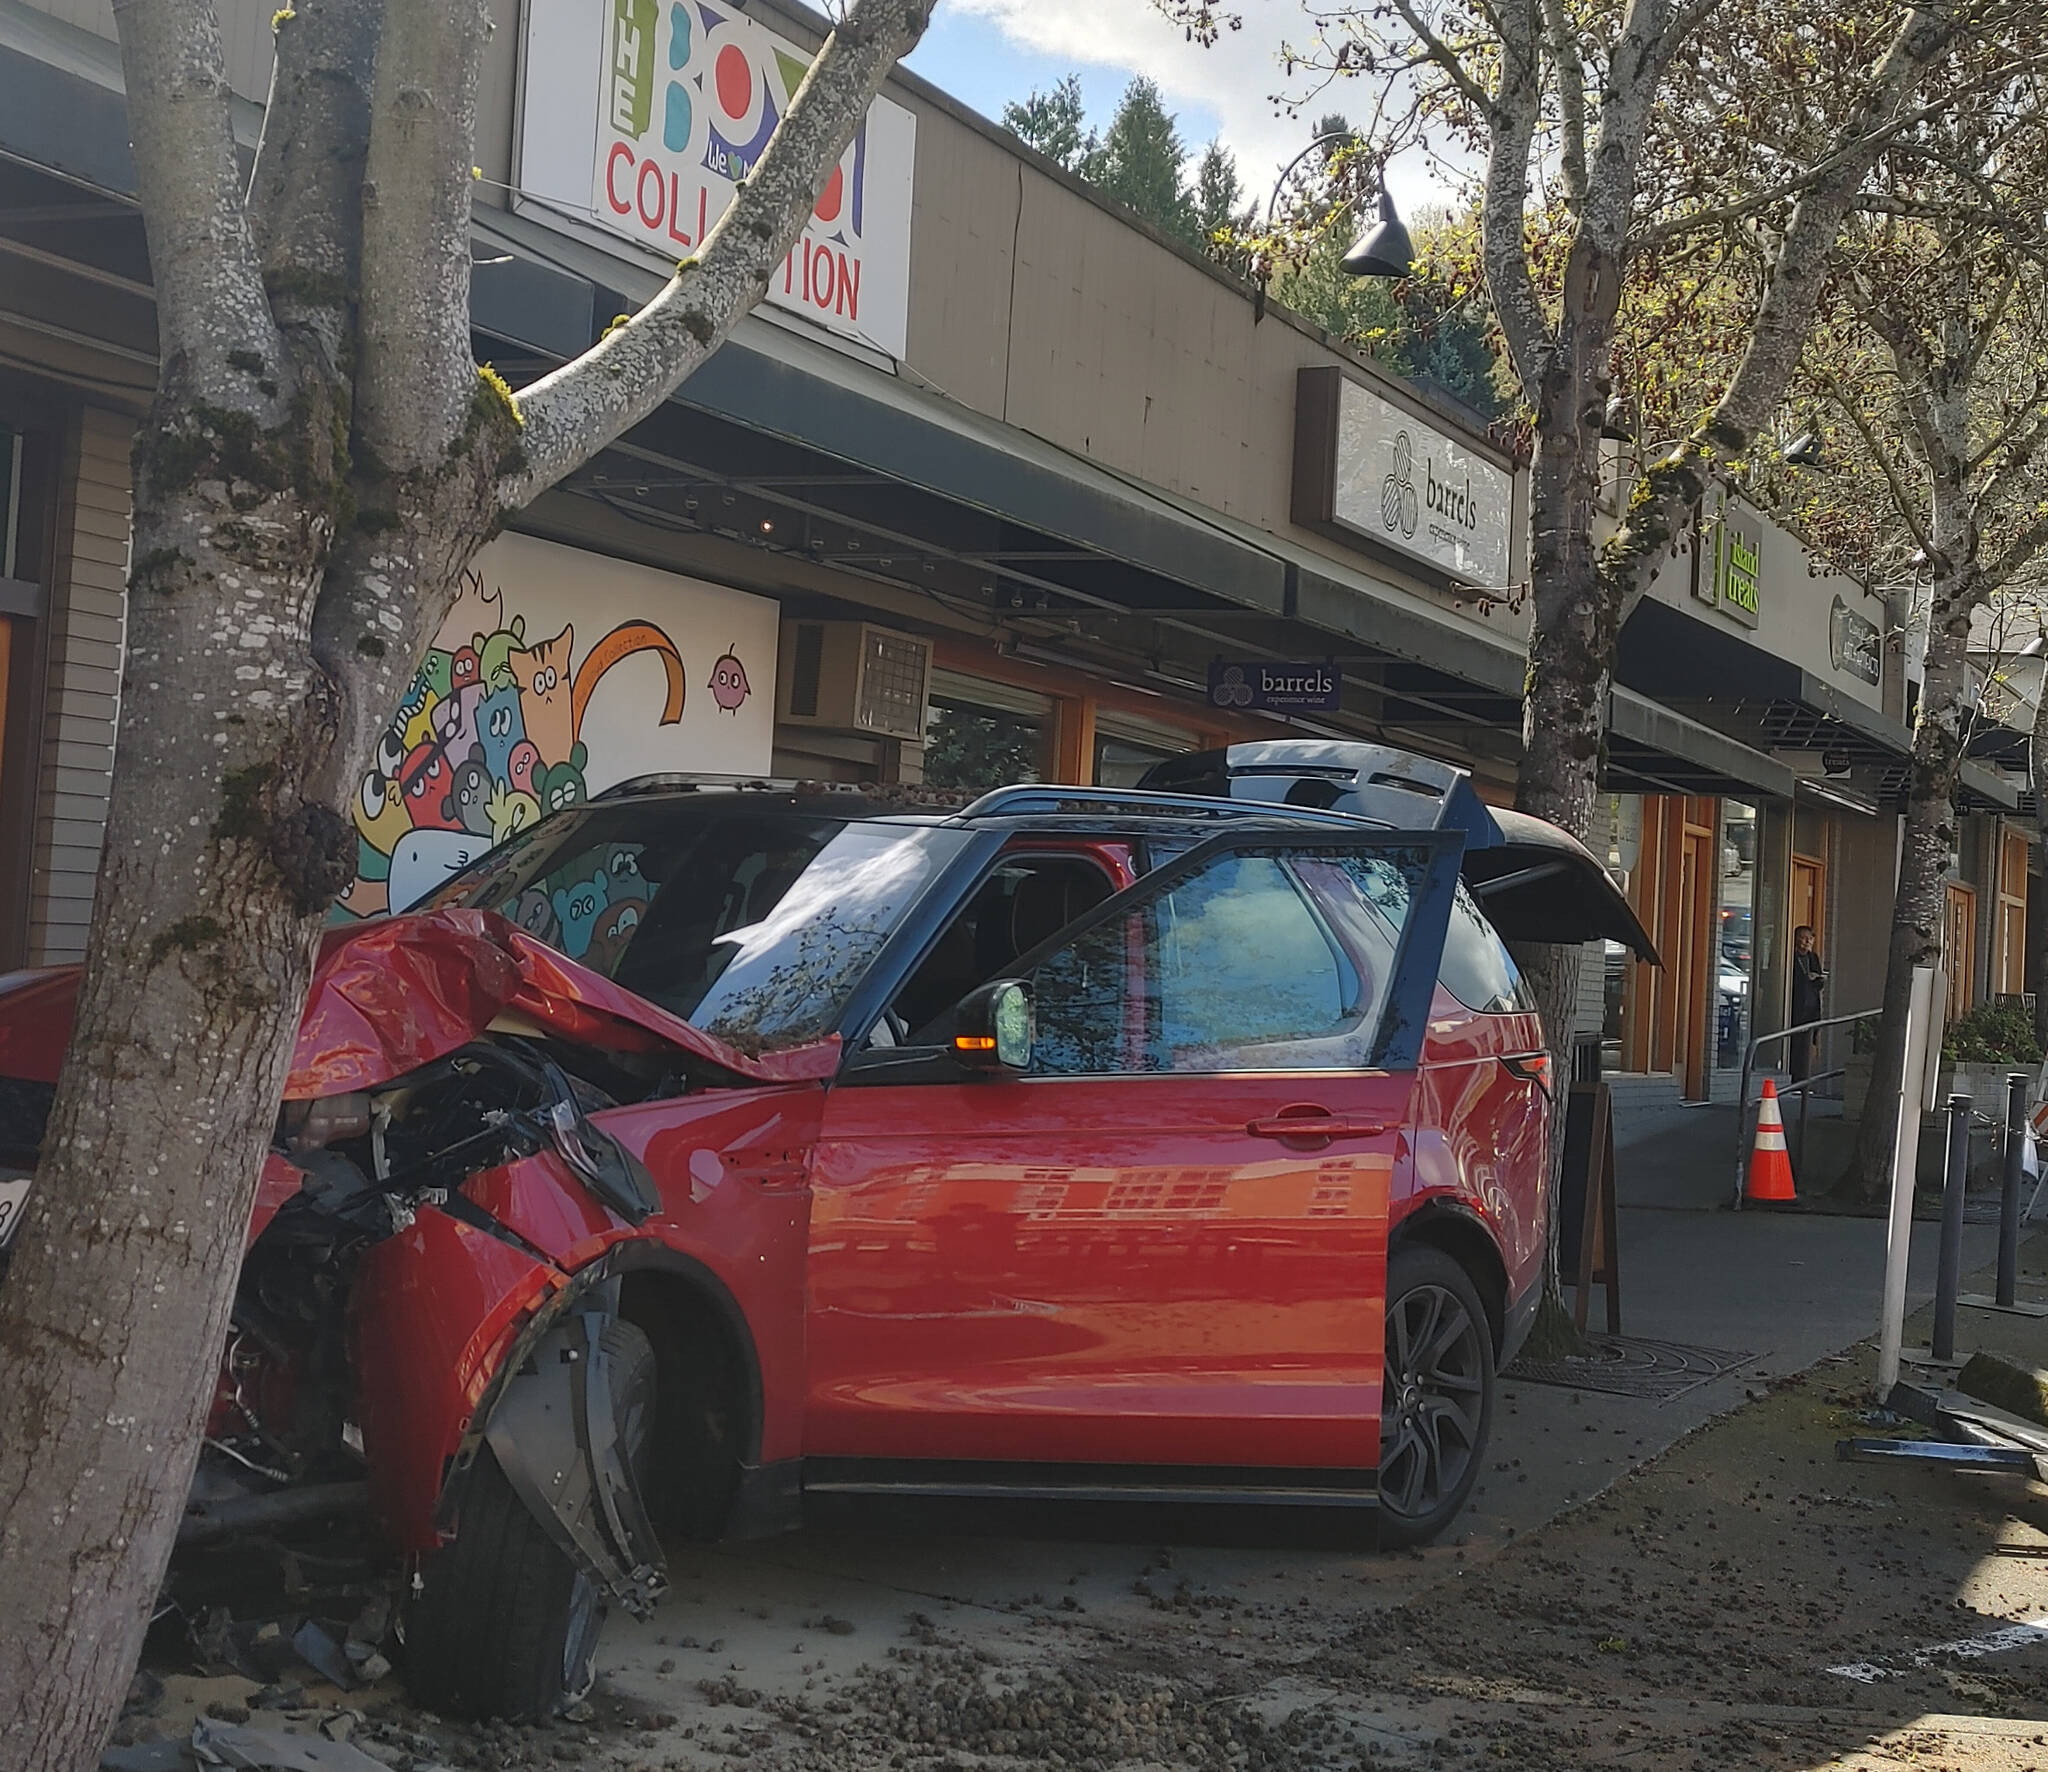 On the afternoon of April 5, a driver attempting to park in a space in The Boyd Collection lot surged forward and crashed his red SUV into a tree on the sidewalk, according to witnesses. Police, fire and emergency vehicles were on the scene after receiving a call at about 2:20 p.m. and the driver received a precautionary transport to the hospital with a possible injury, according to police and witness reports. There was no damage to any of the shops. The Boyd Collection is located at 7605 SE 27th St. Andy Nystrom/ staff photo